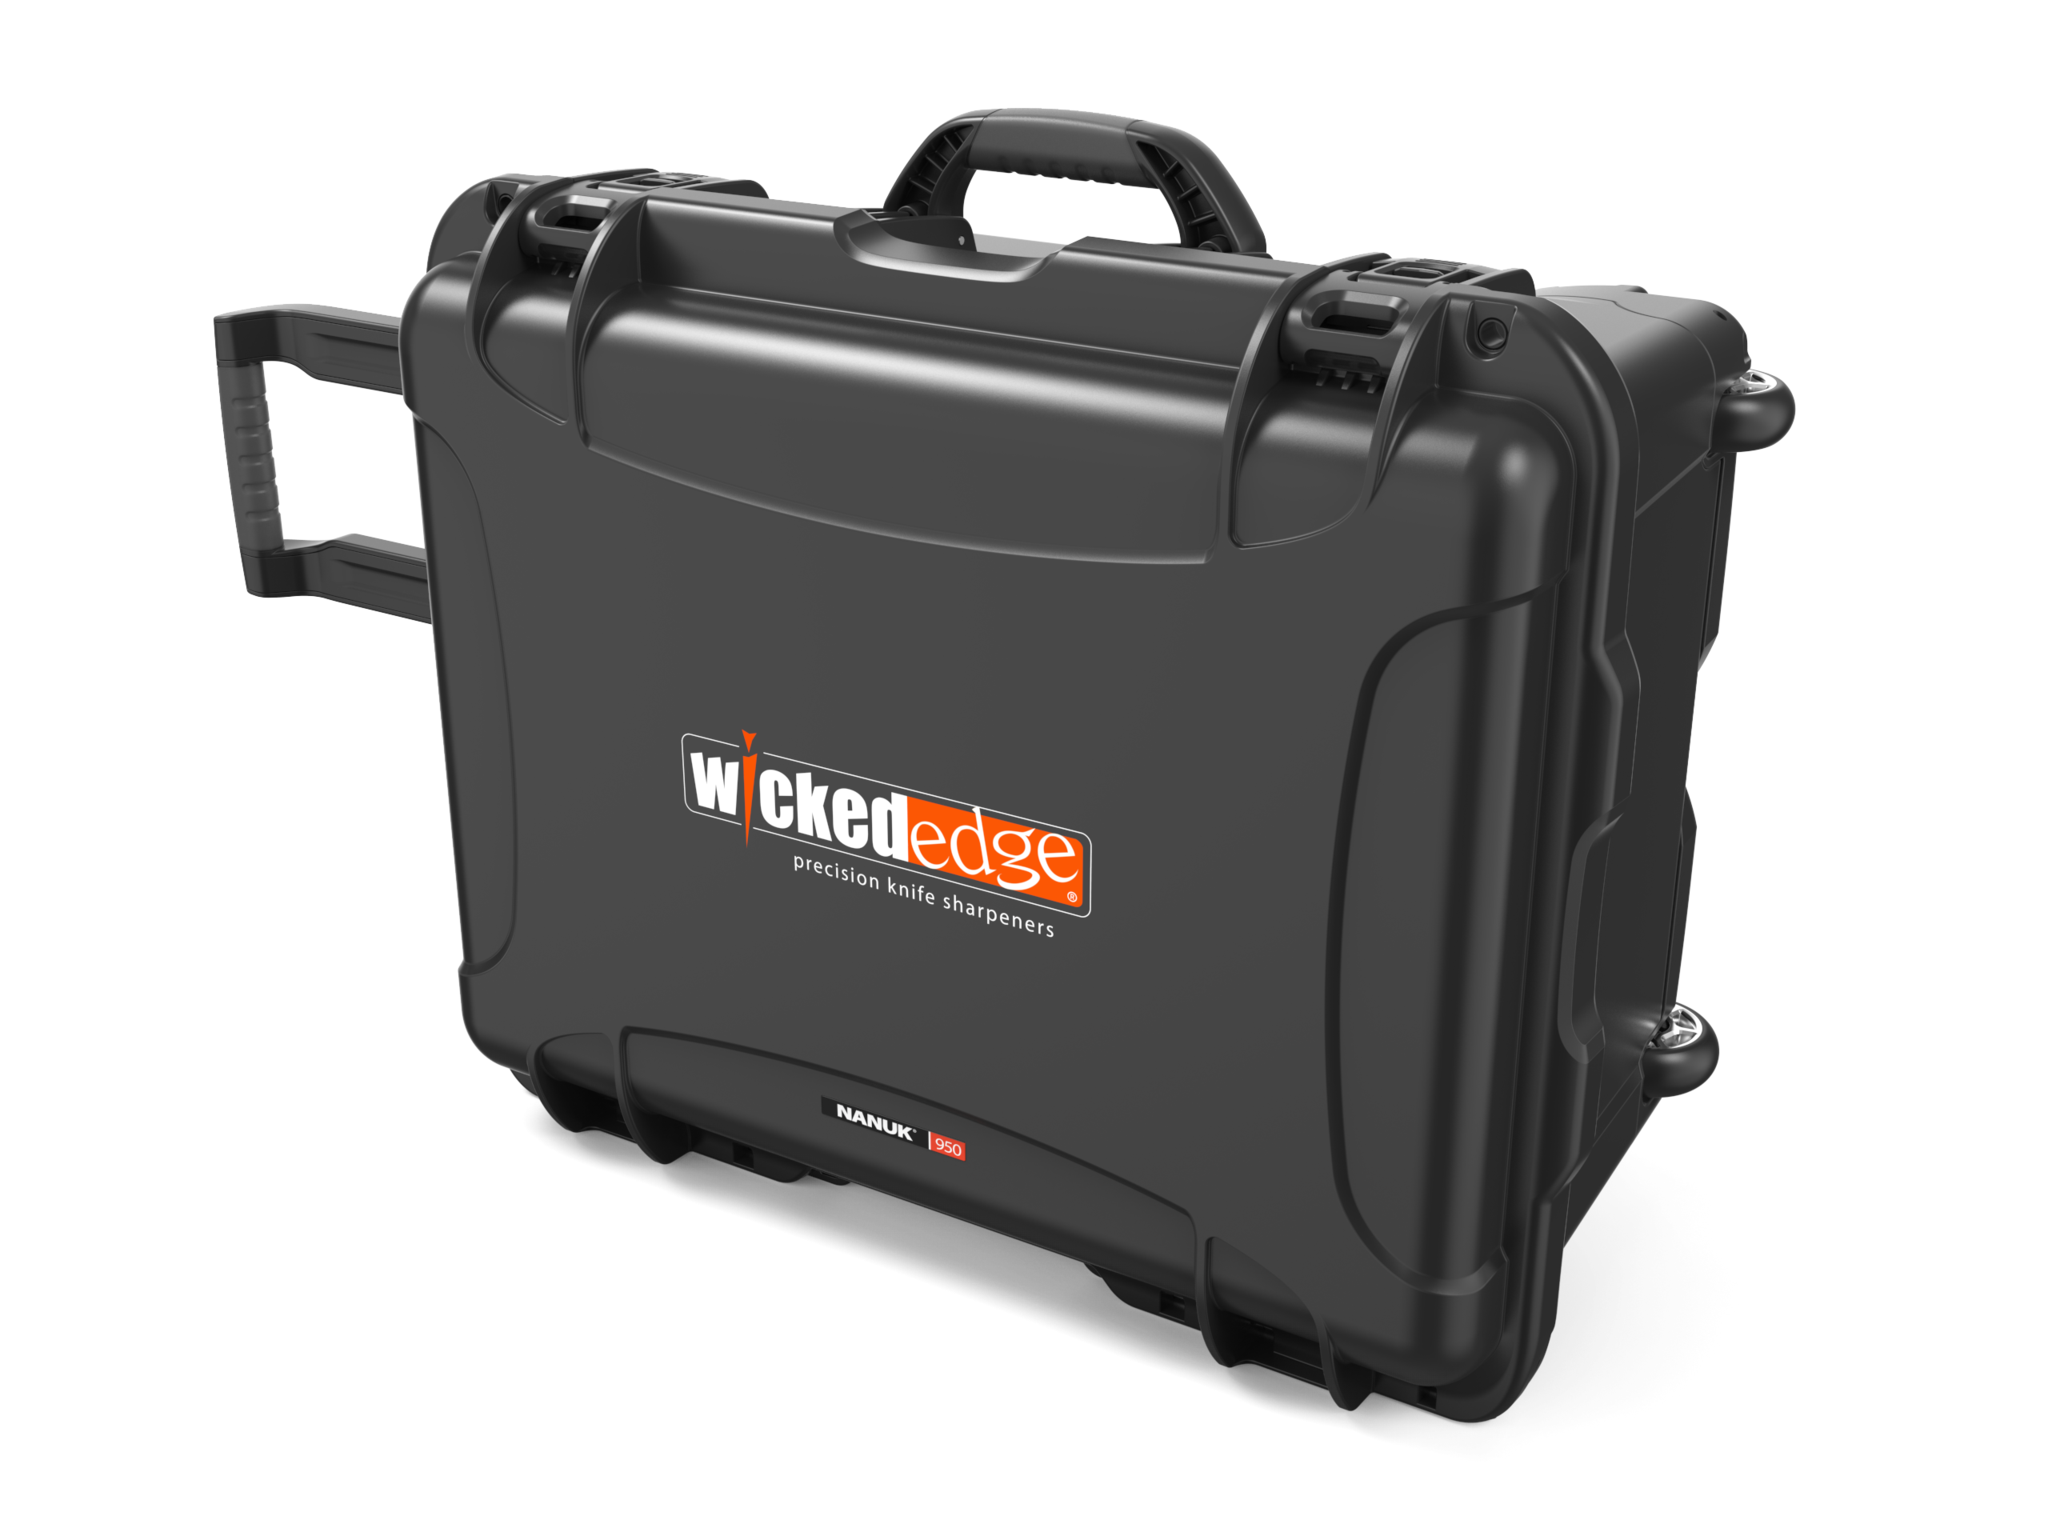 Hard Carrying / Rolling Case with Retractable Handle